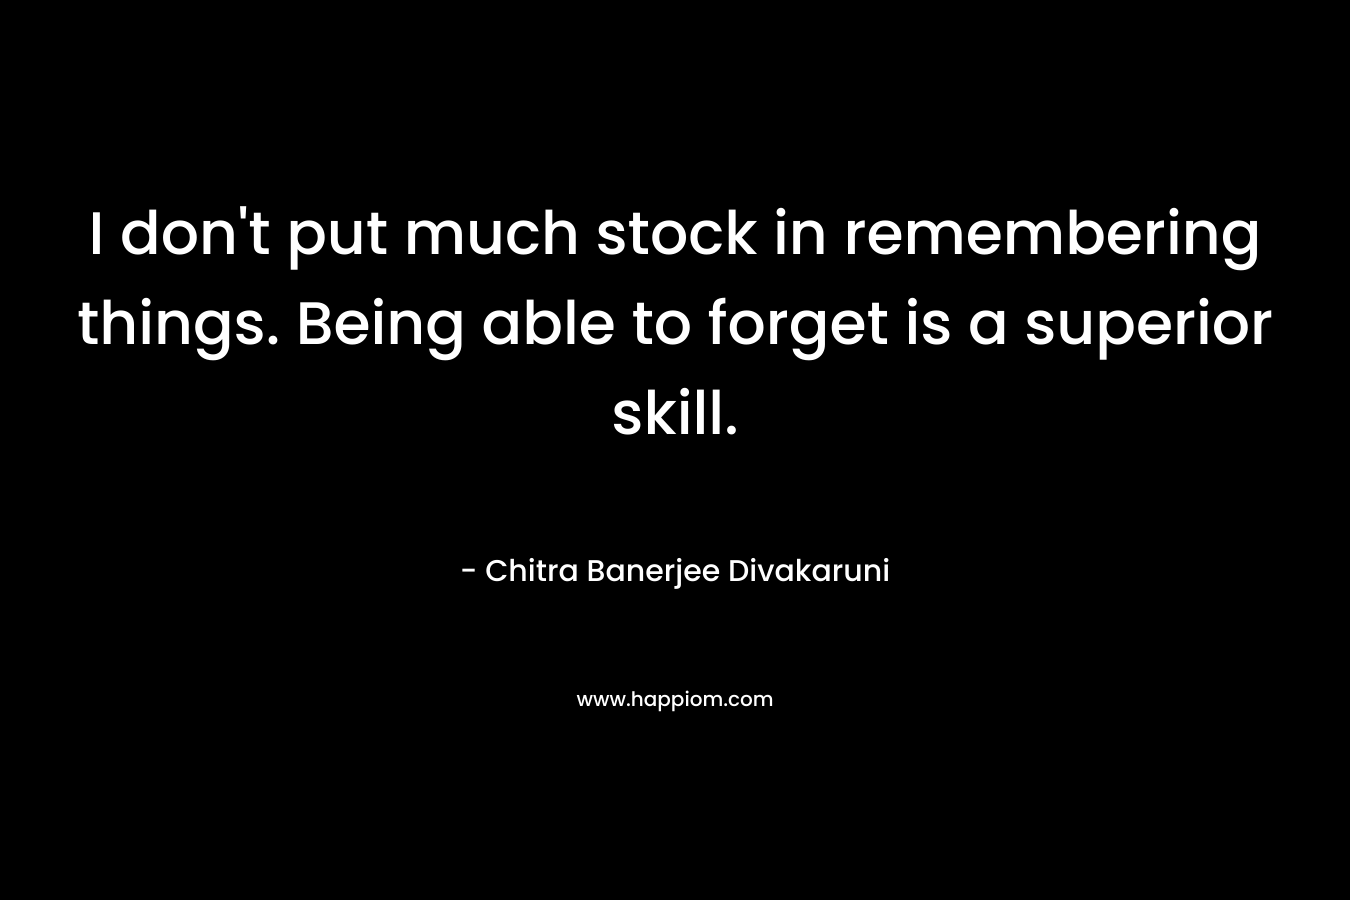 I don't put much stock in remembering things. Being able to forget is a superior skill.